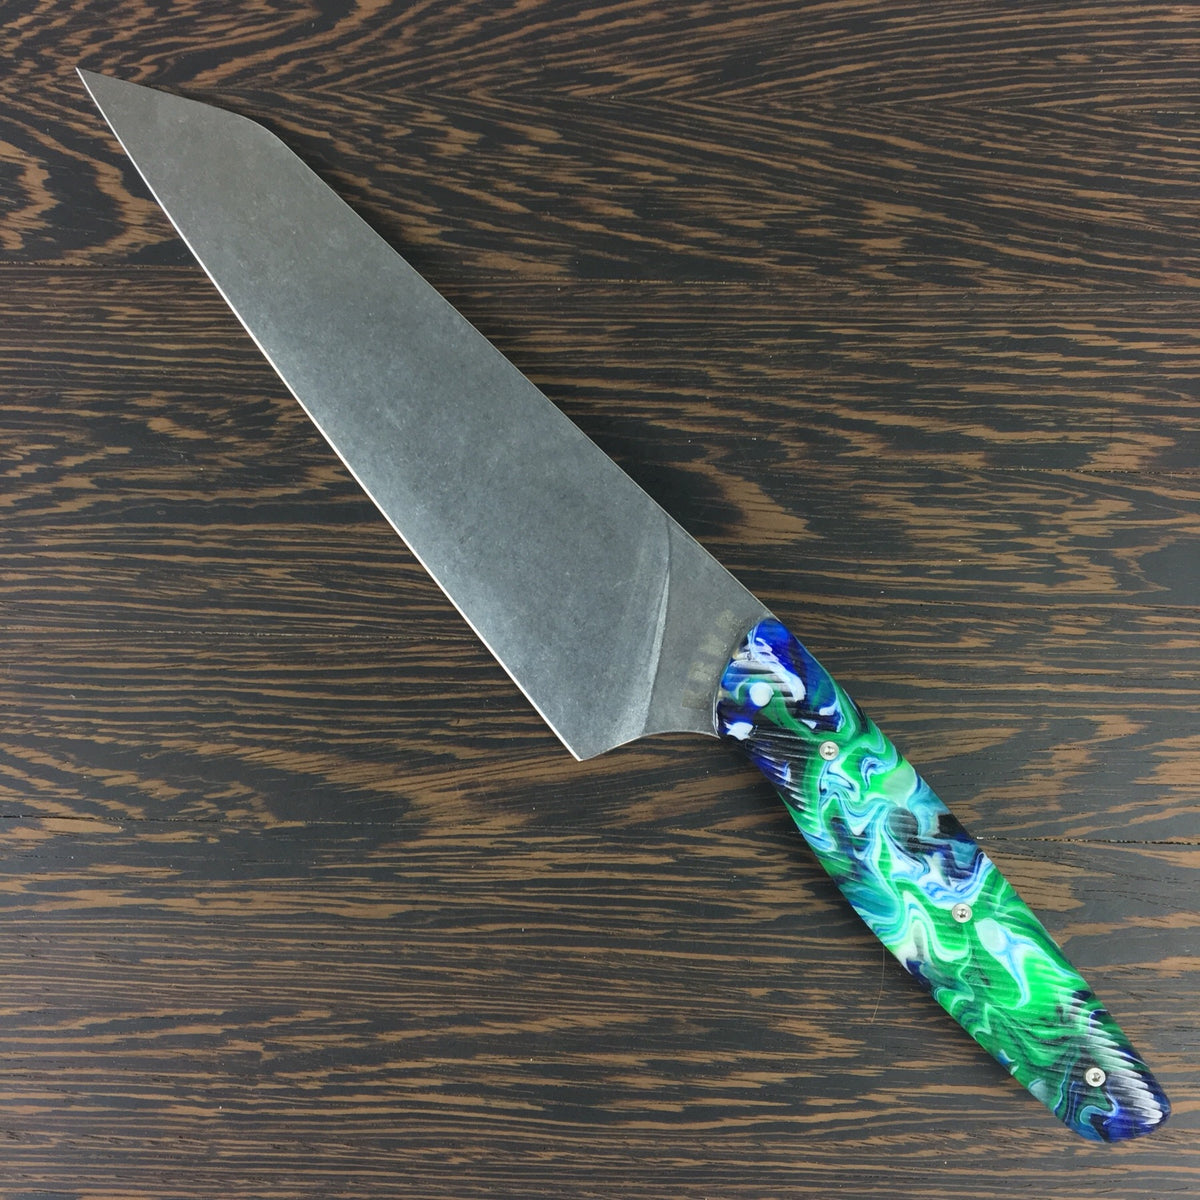 Lil’ Stormy - 7.6” Gyuto Chef Knife S35VN Stainless Steel